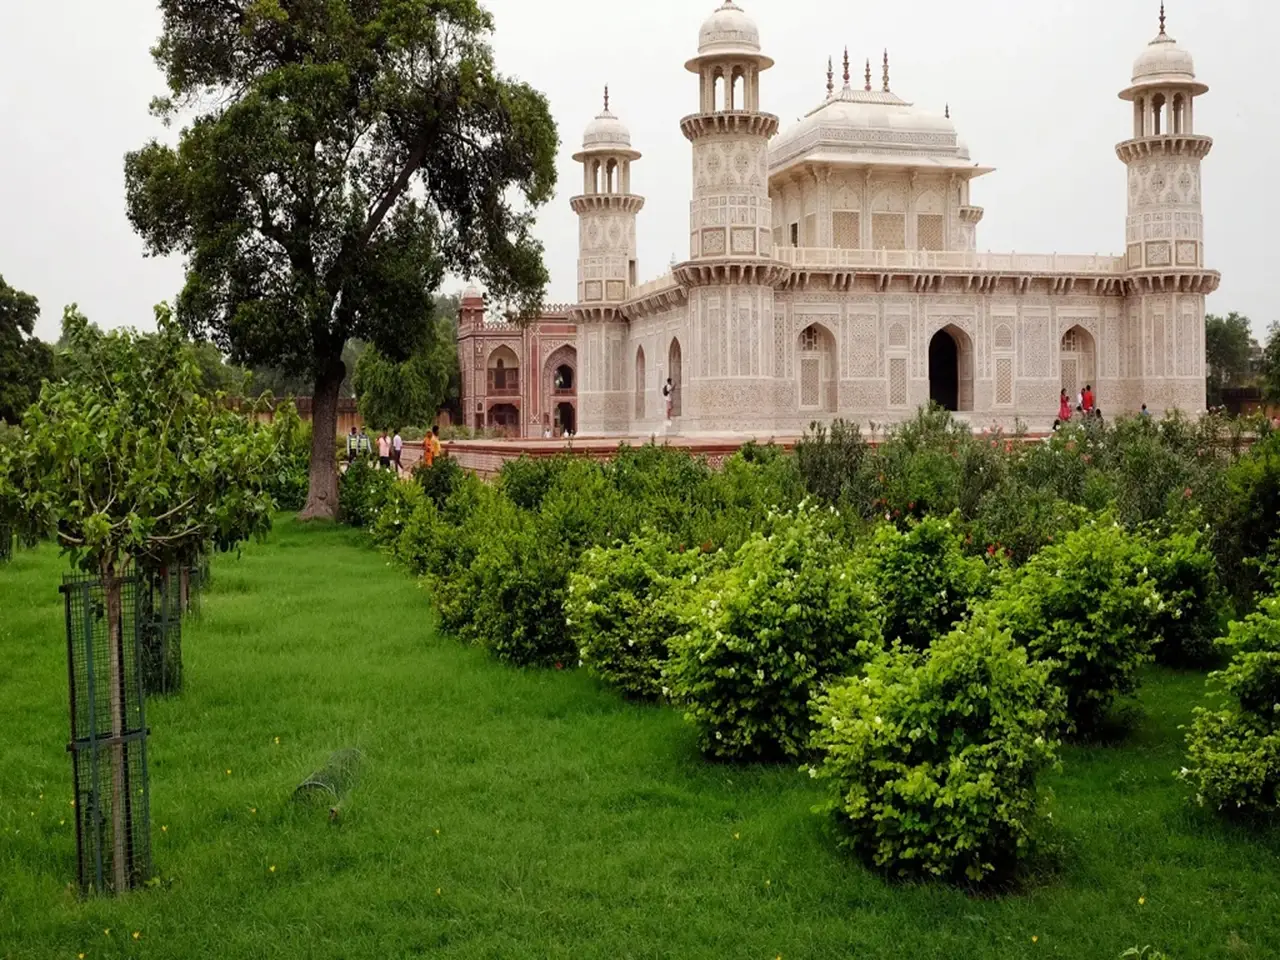 Mughal garden designs are highly influenced by historic Islamic gardens and are frequently seen as a place for relaxation and meditation.